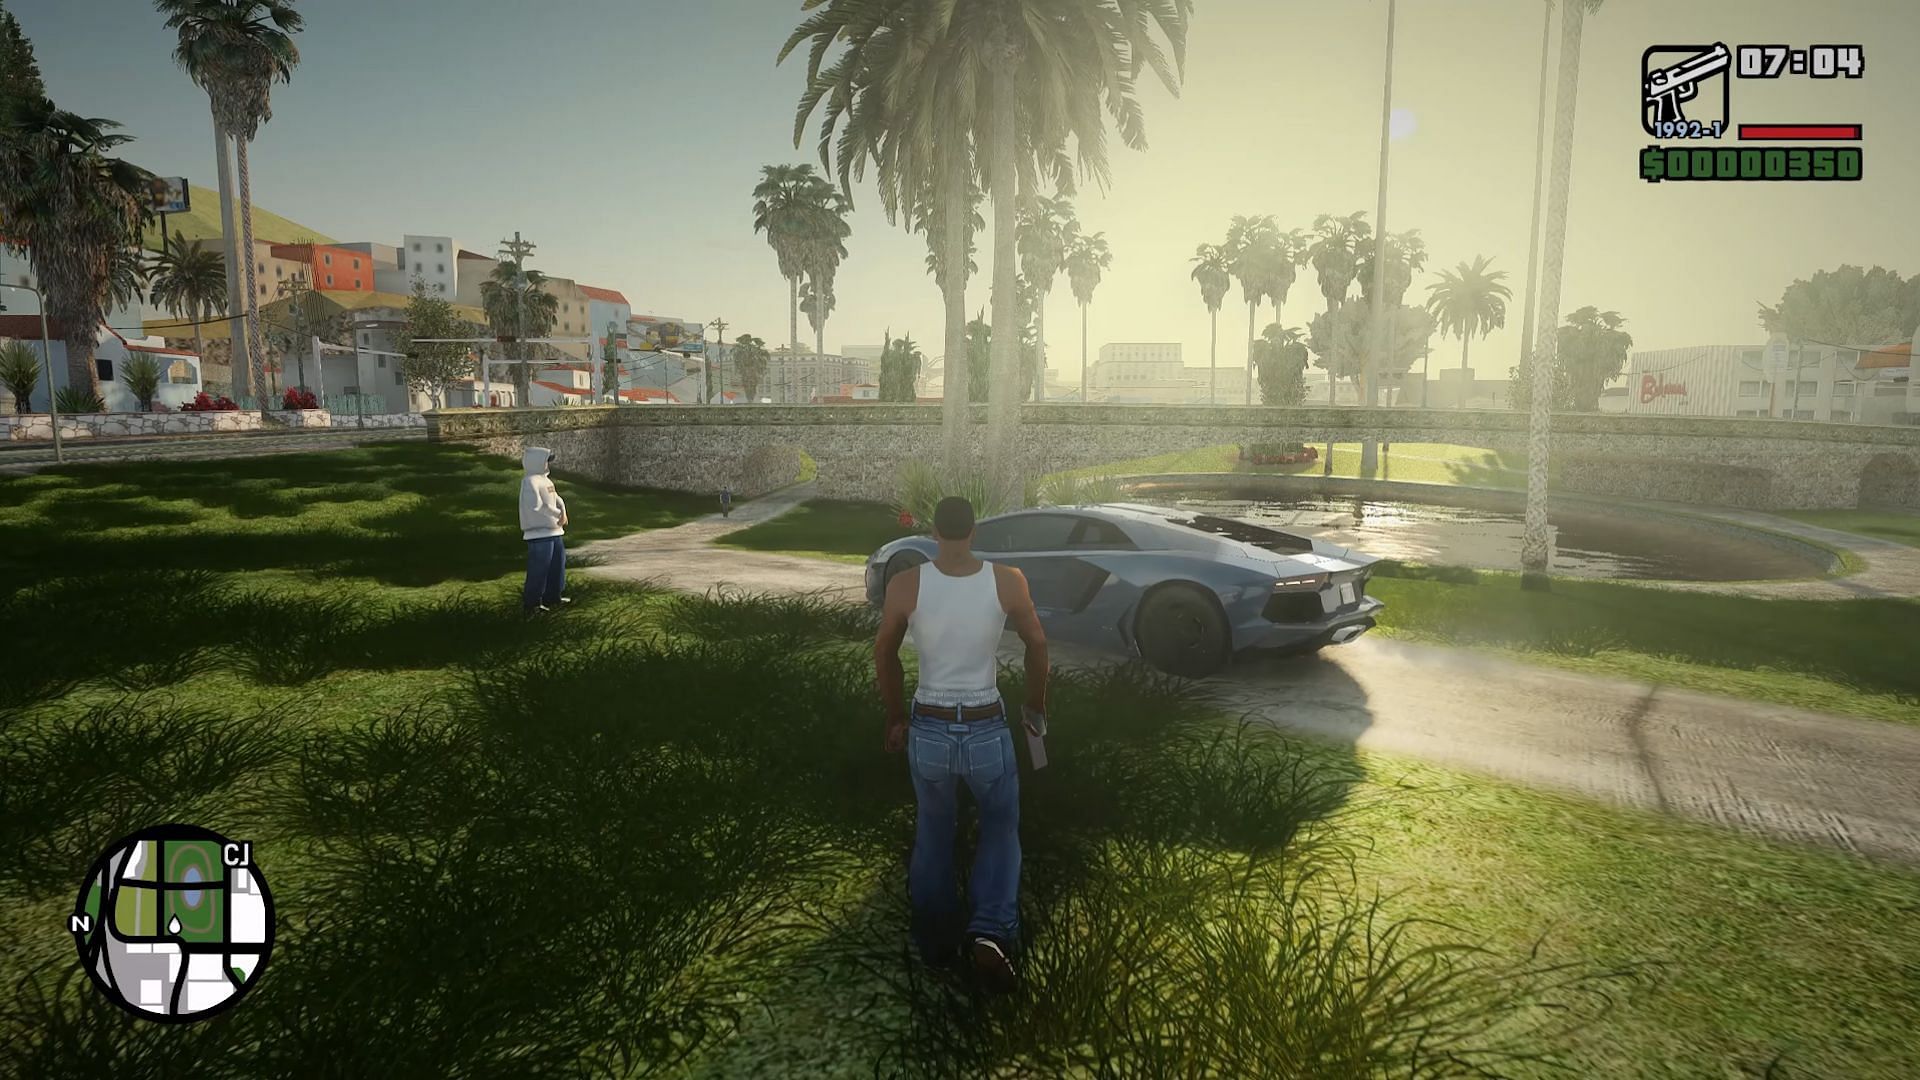 Download Grand Theft Auto: San Andreas(GTA) MOD APK v2.00 (Mod Inside) For  Android